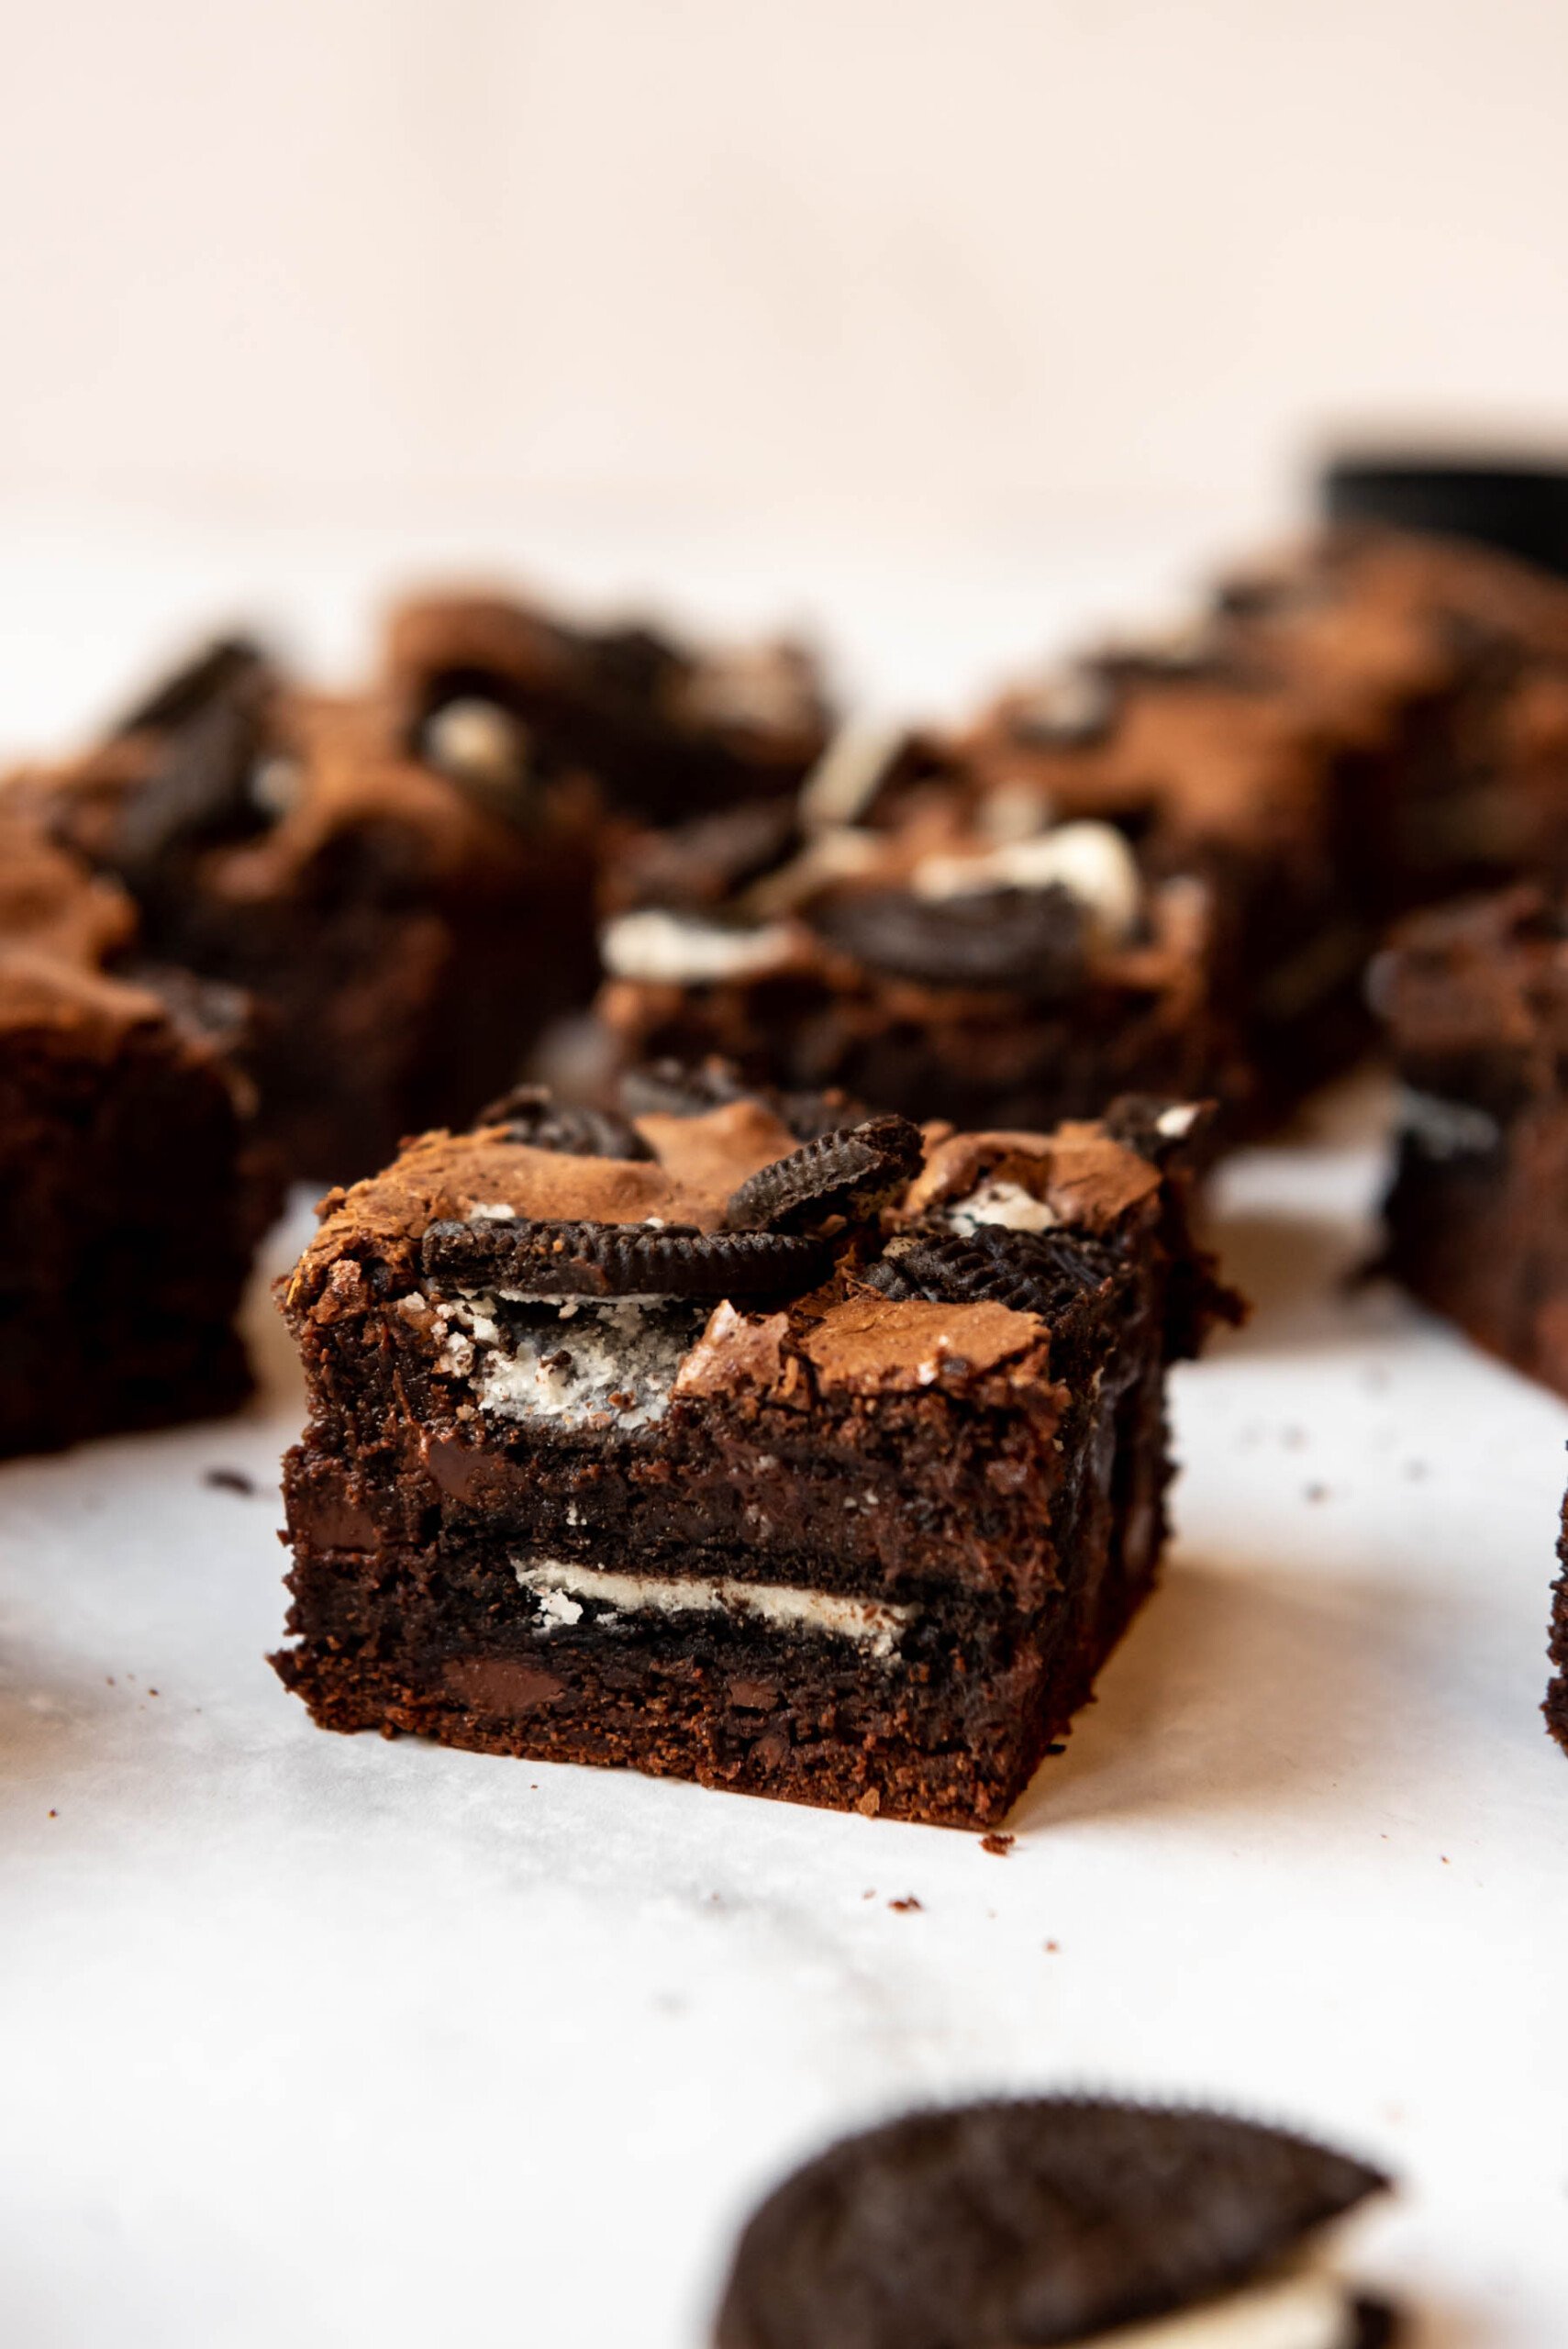 An Oreo brownie with whole Oreos in the middle and crushed Oreos on top.